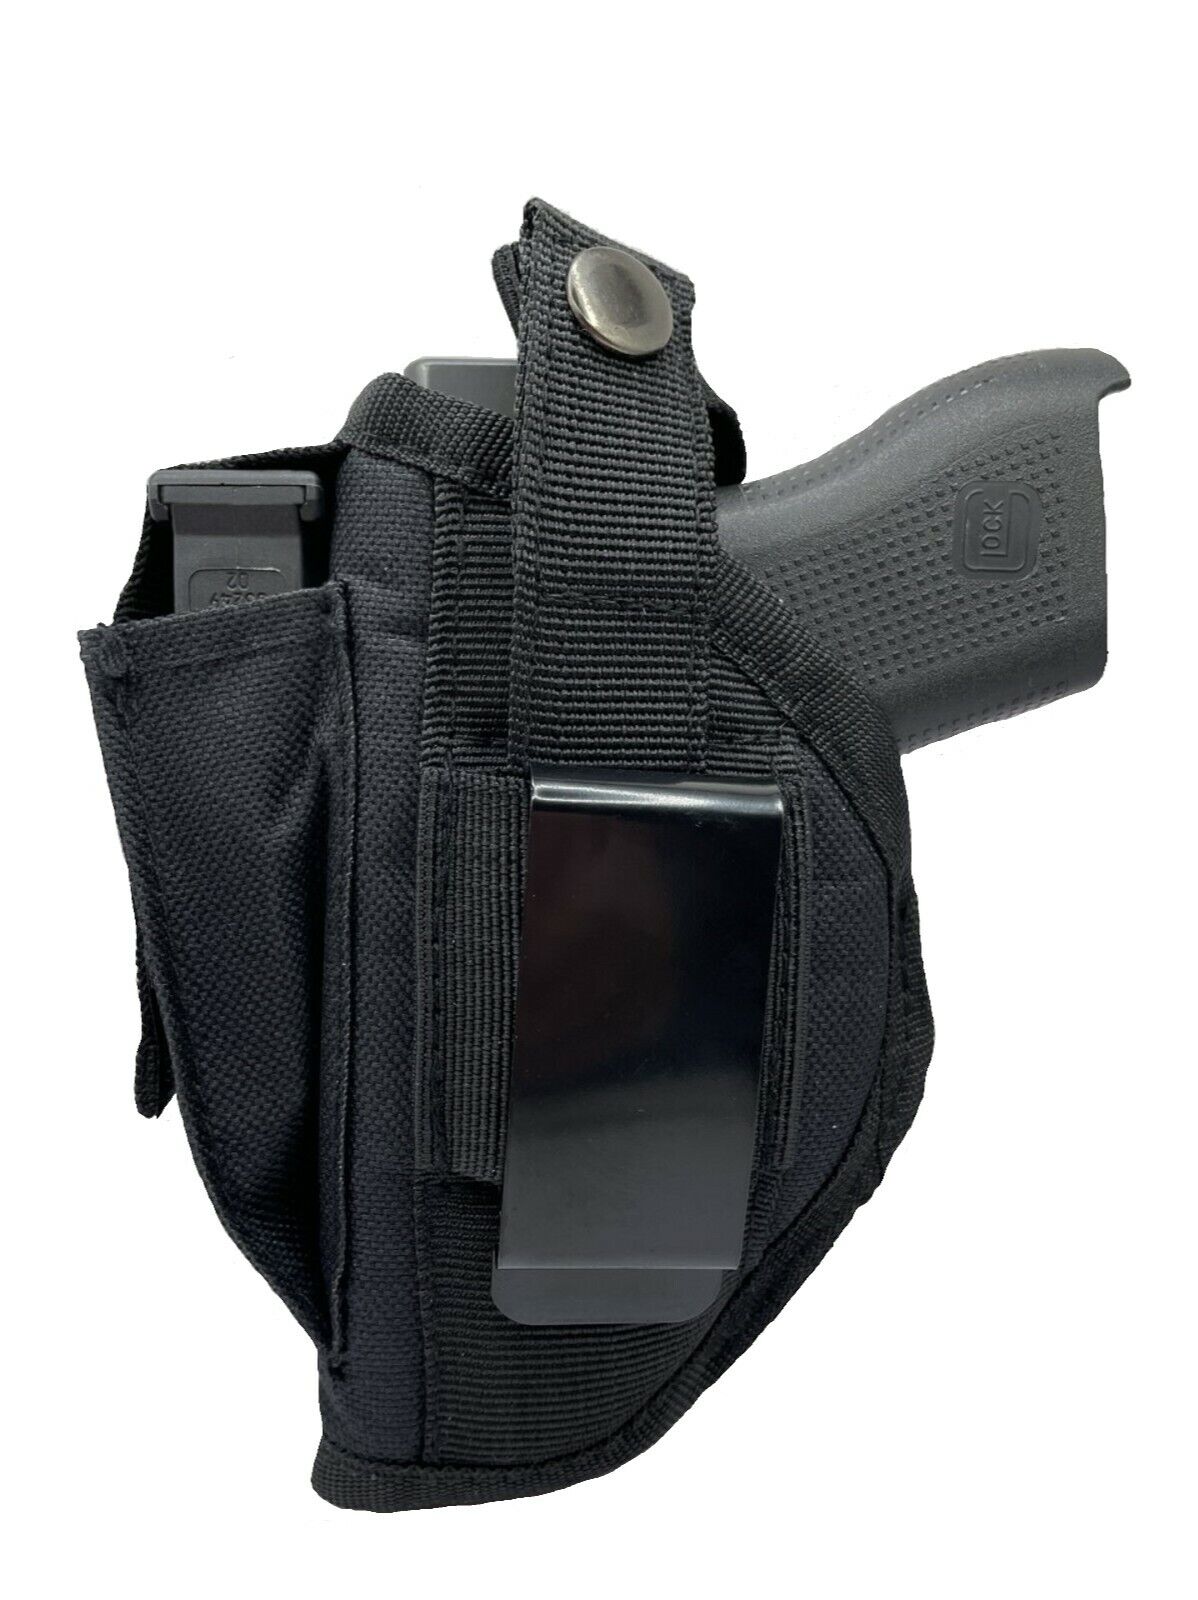 Safariland 6360-219 S&w M&p .40 9mm Duty Holster STX RH With M3 Light for sale online